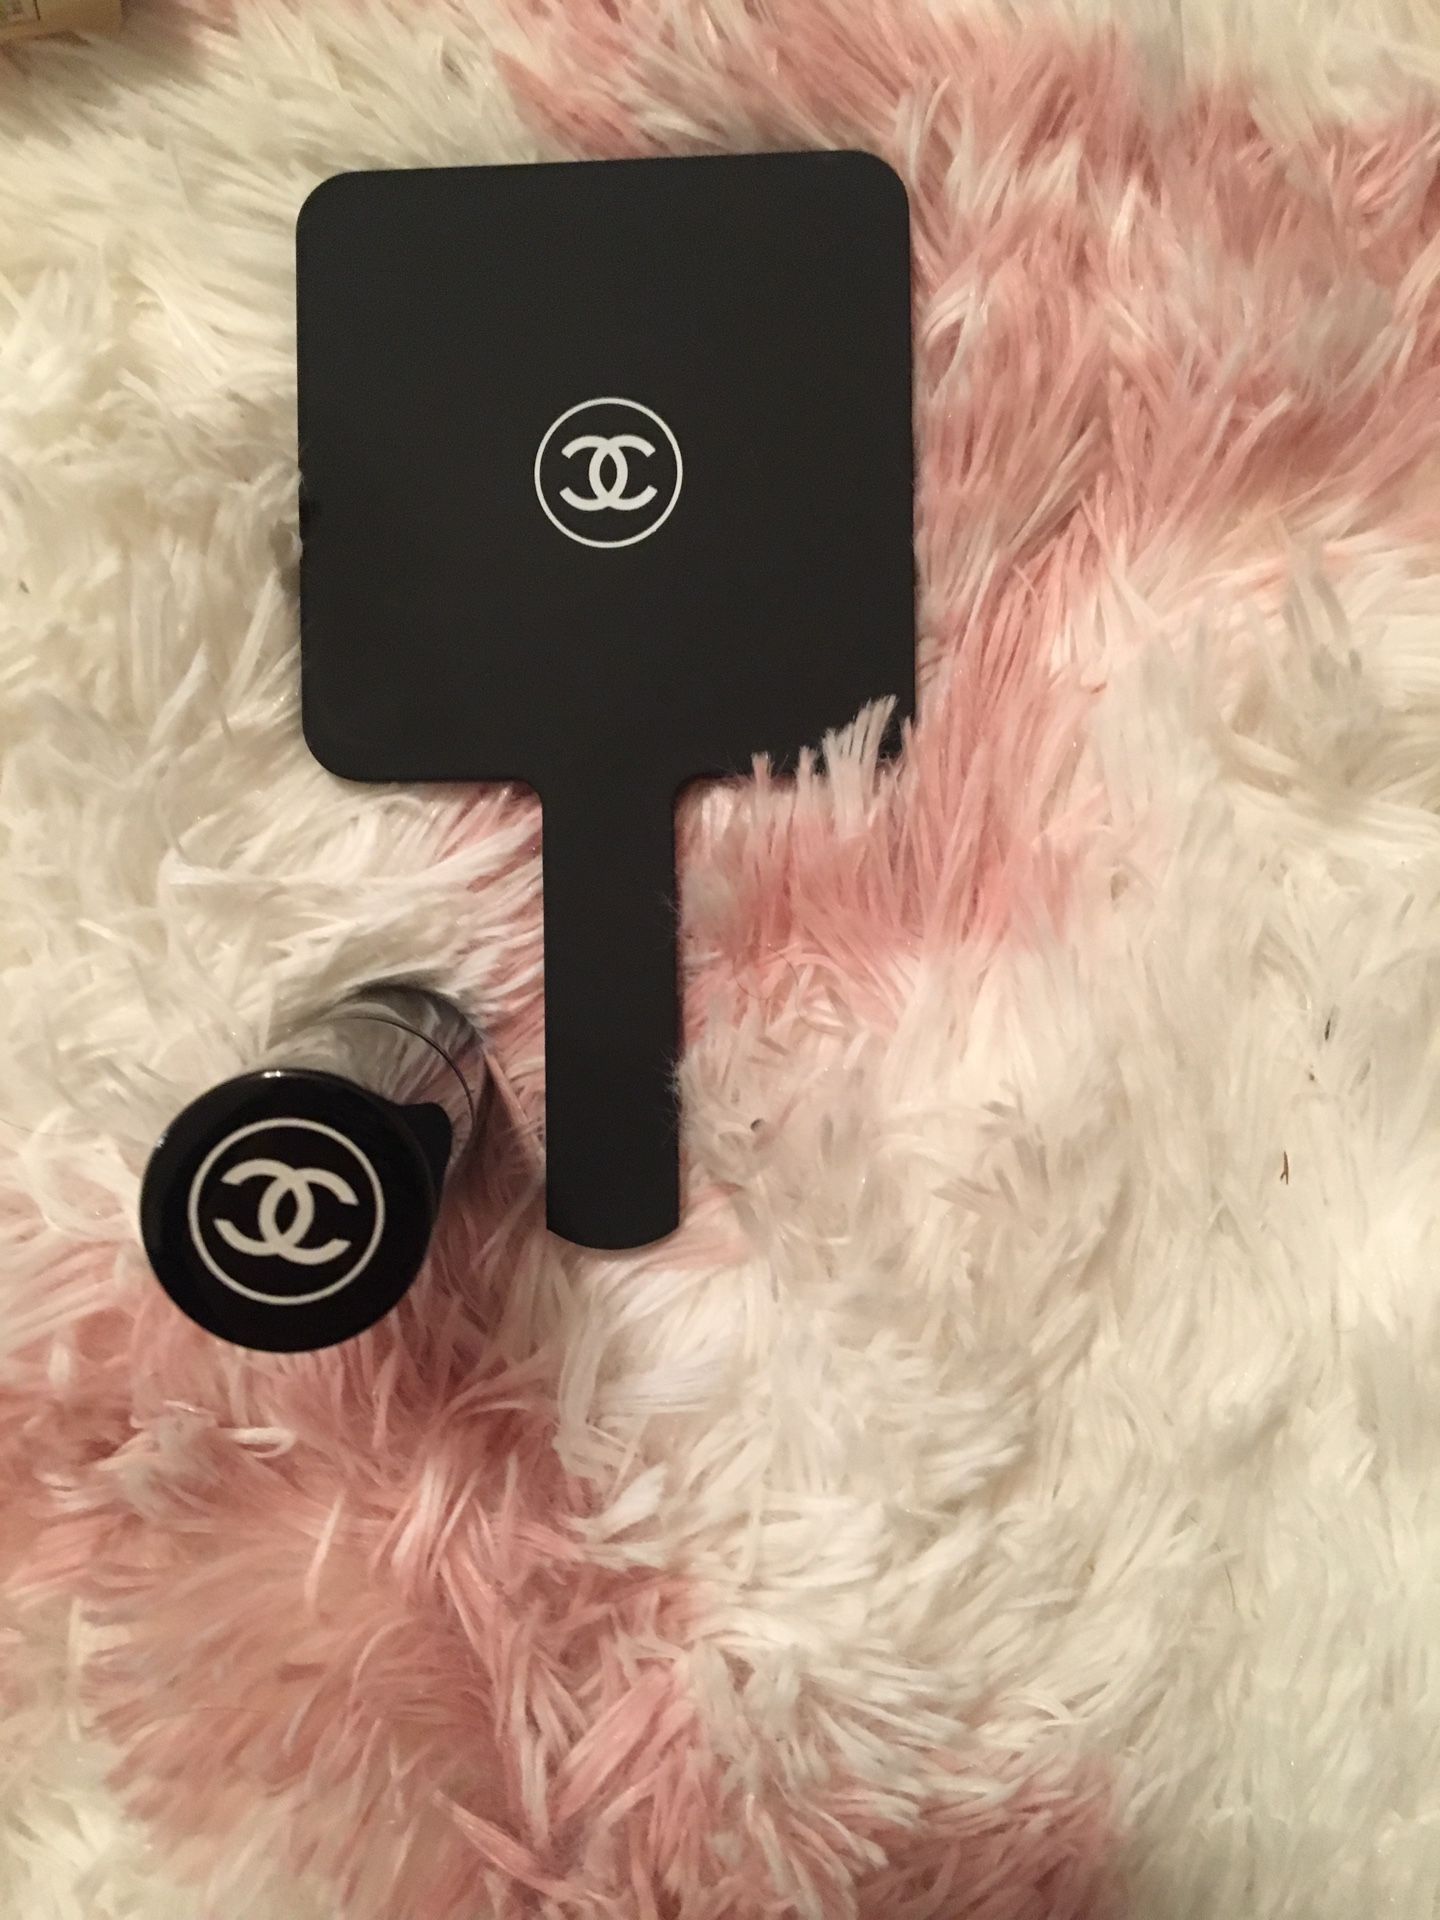 Chanel mirror and makeup brush